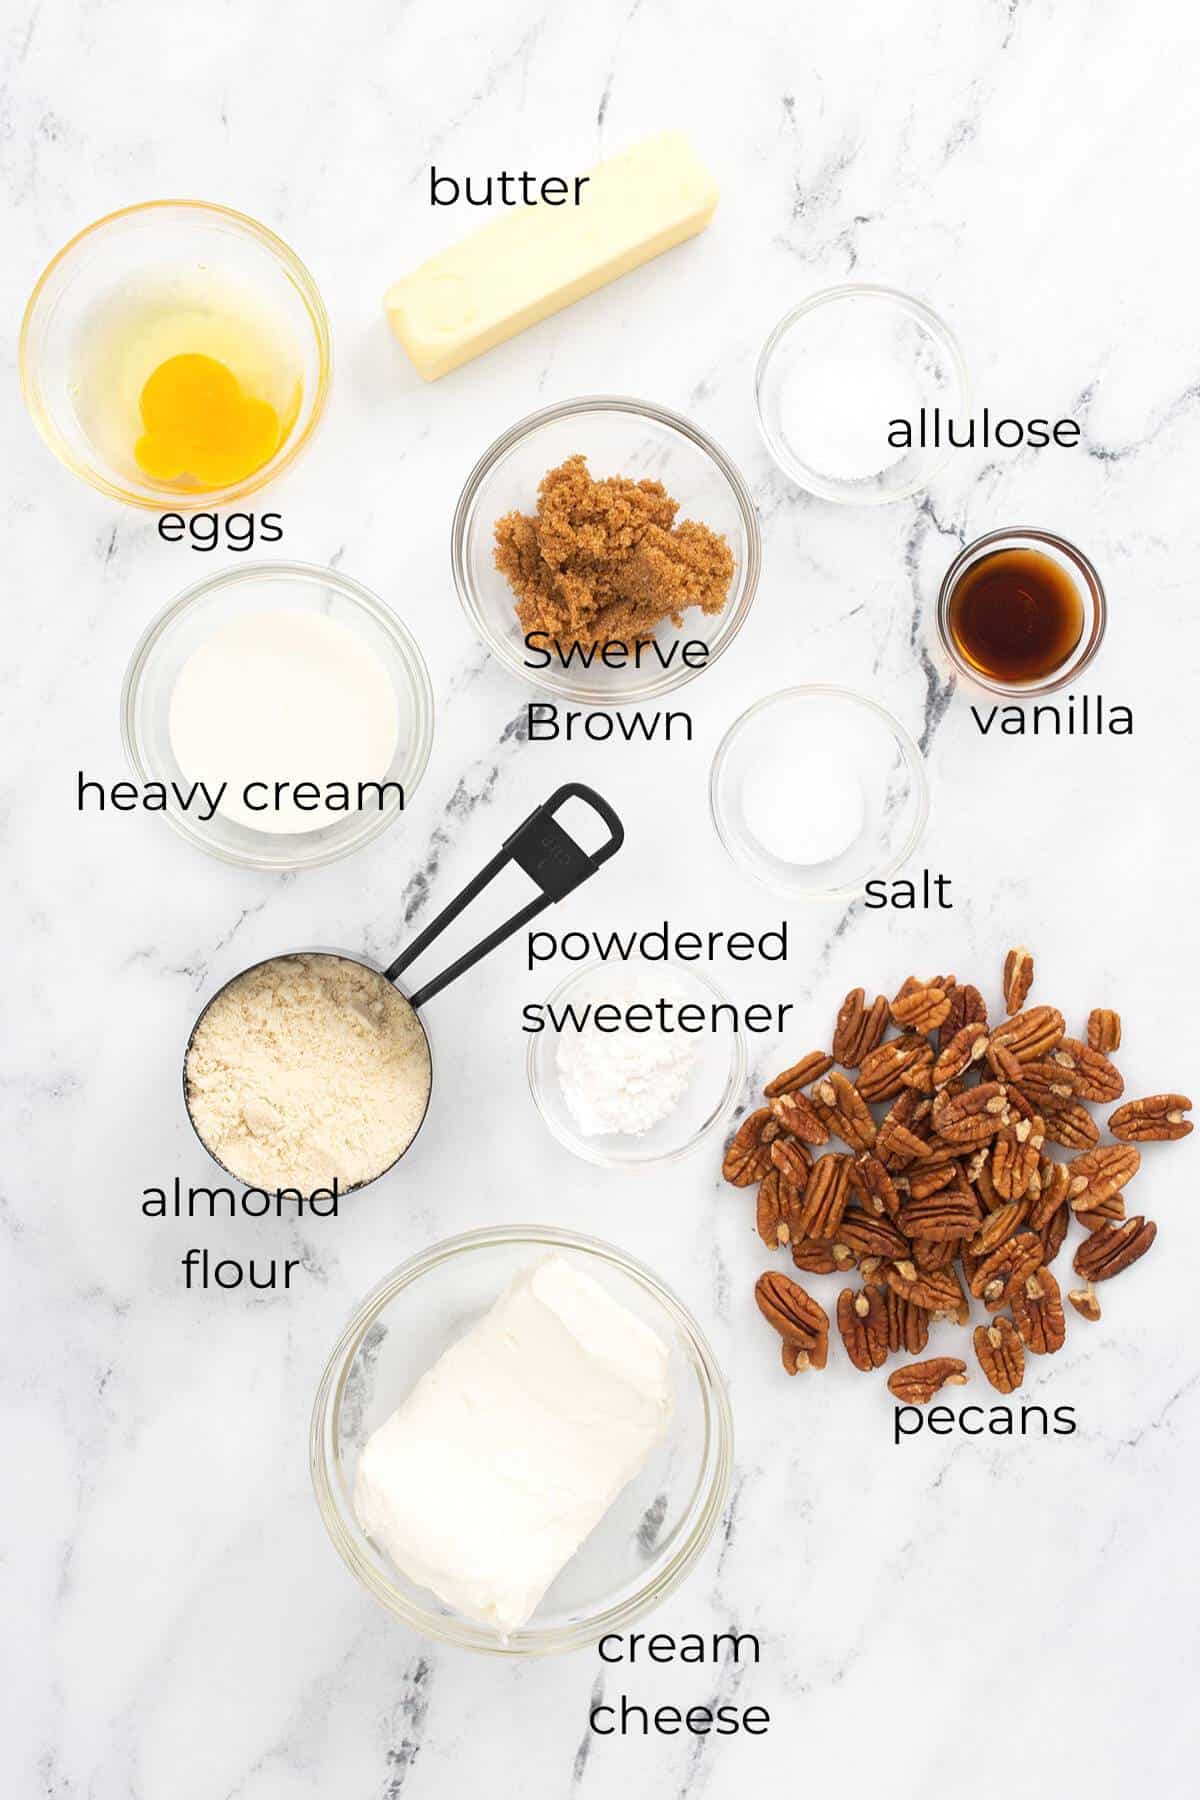 Top down image of ingredients needed for Keto Pecan Pie Cheesecake.